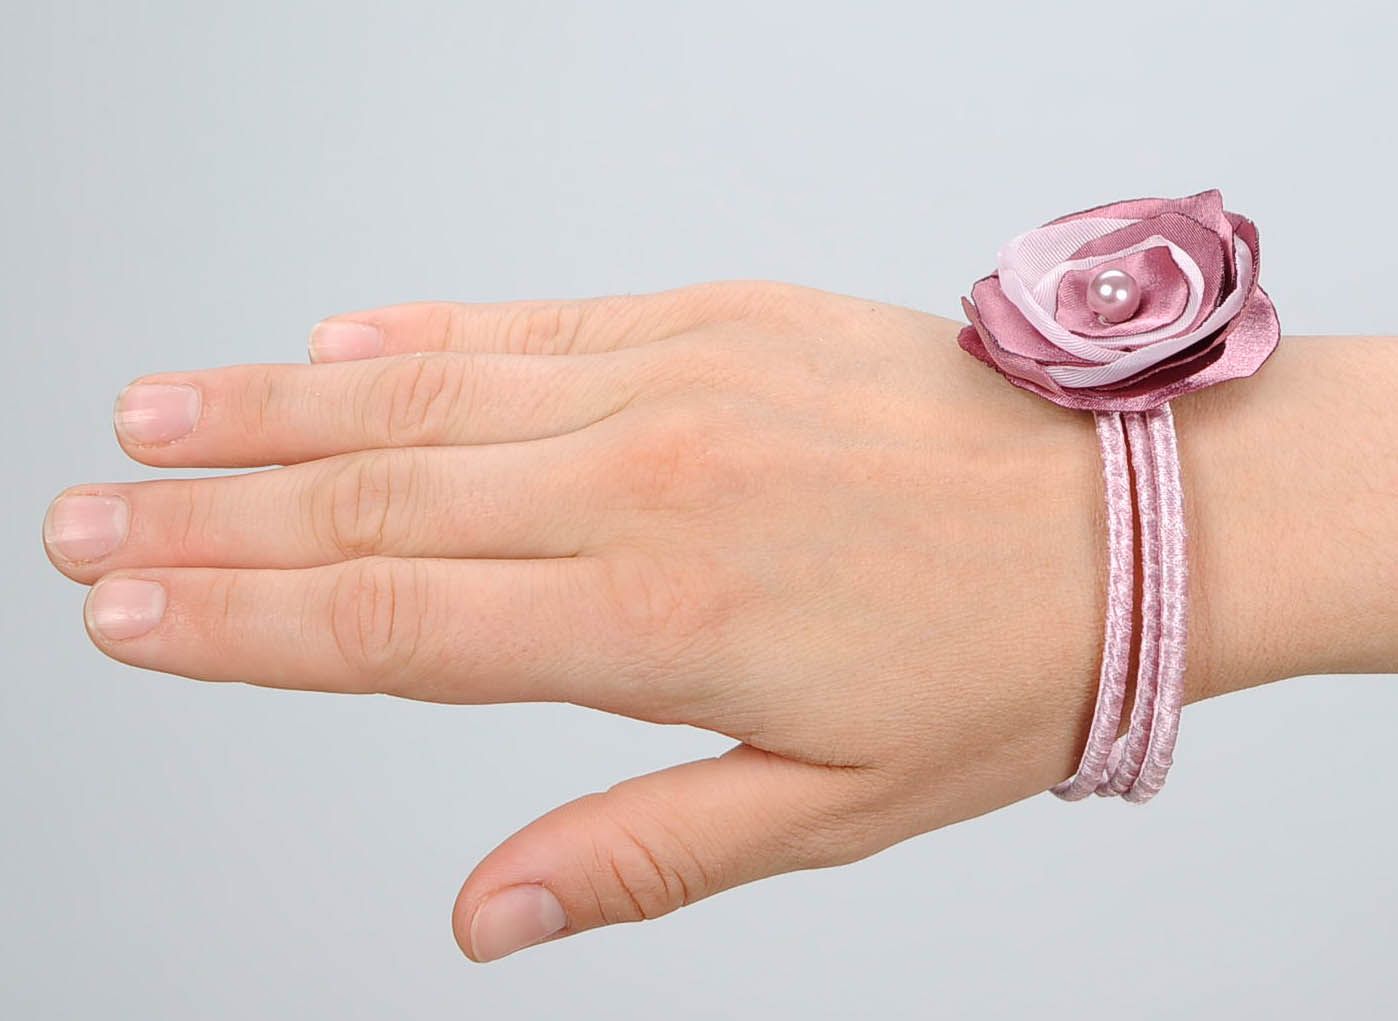 Bracelet with flower made of organza and satin Snowy plum photo 5